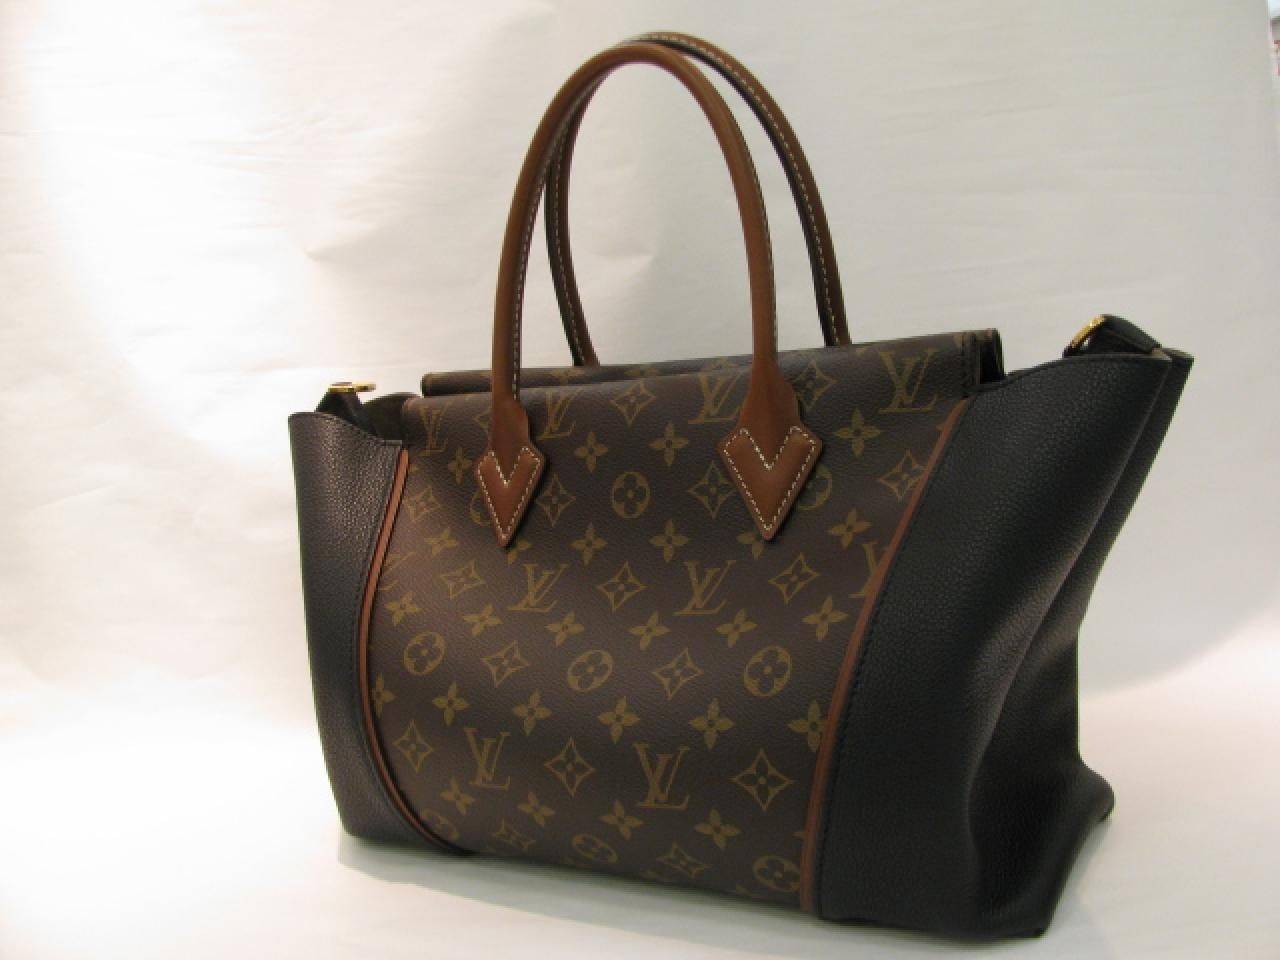 This is an authentic LOUIS VUITTON Monogram W PM in Black. This luxurious and elegant handbag is finely crafted of classic monogram toile canvas and supple black box calfskin leather. The leather piping trim matches the cafe brown rolled leather top